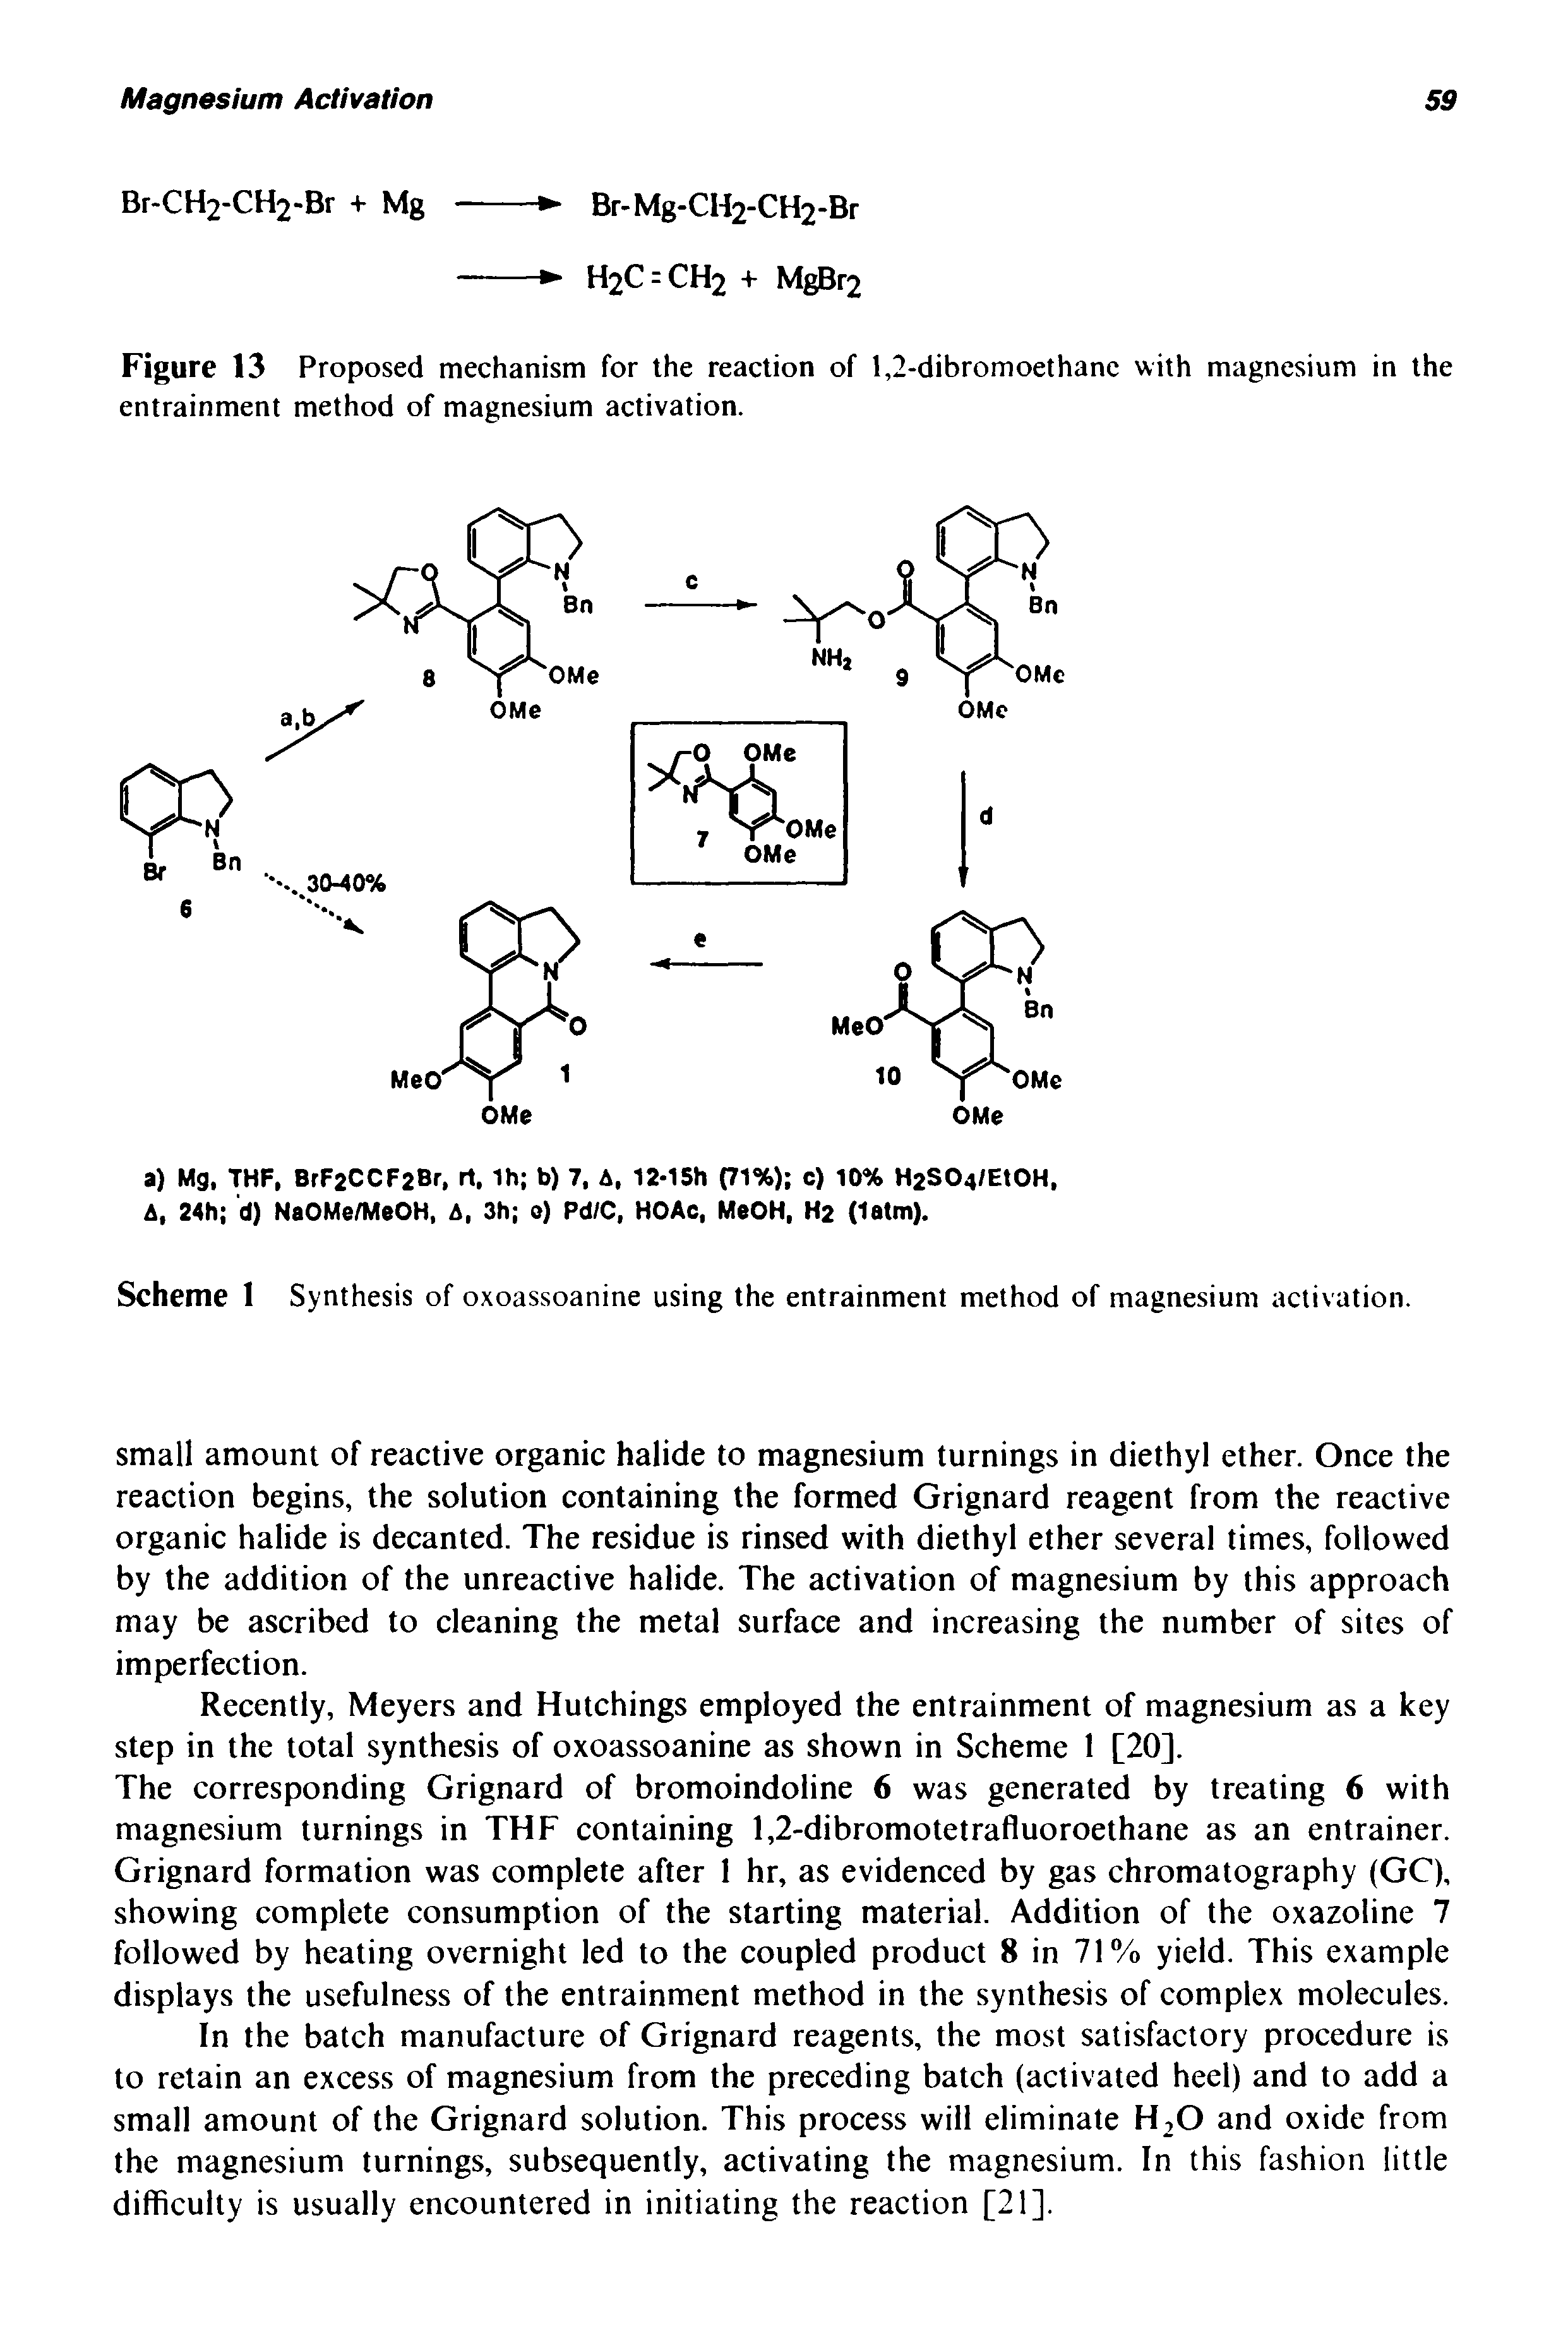 Figure 13 Proposed mechanism for the reaction of 1,2-dibromoethanc with magnesium in the entrainment method of magnesium activation.